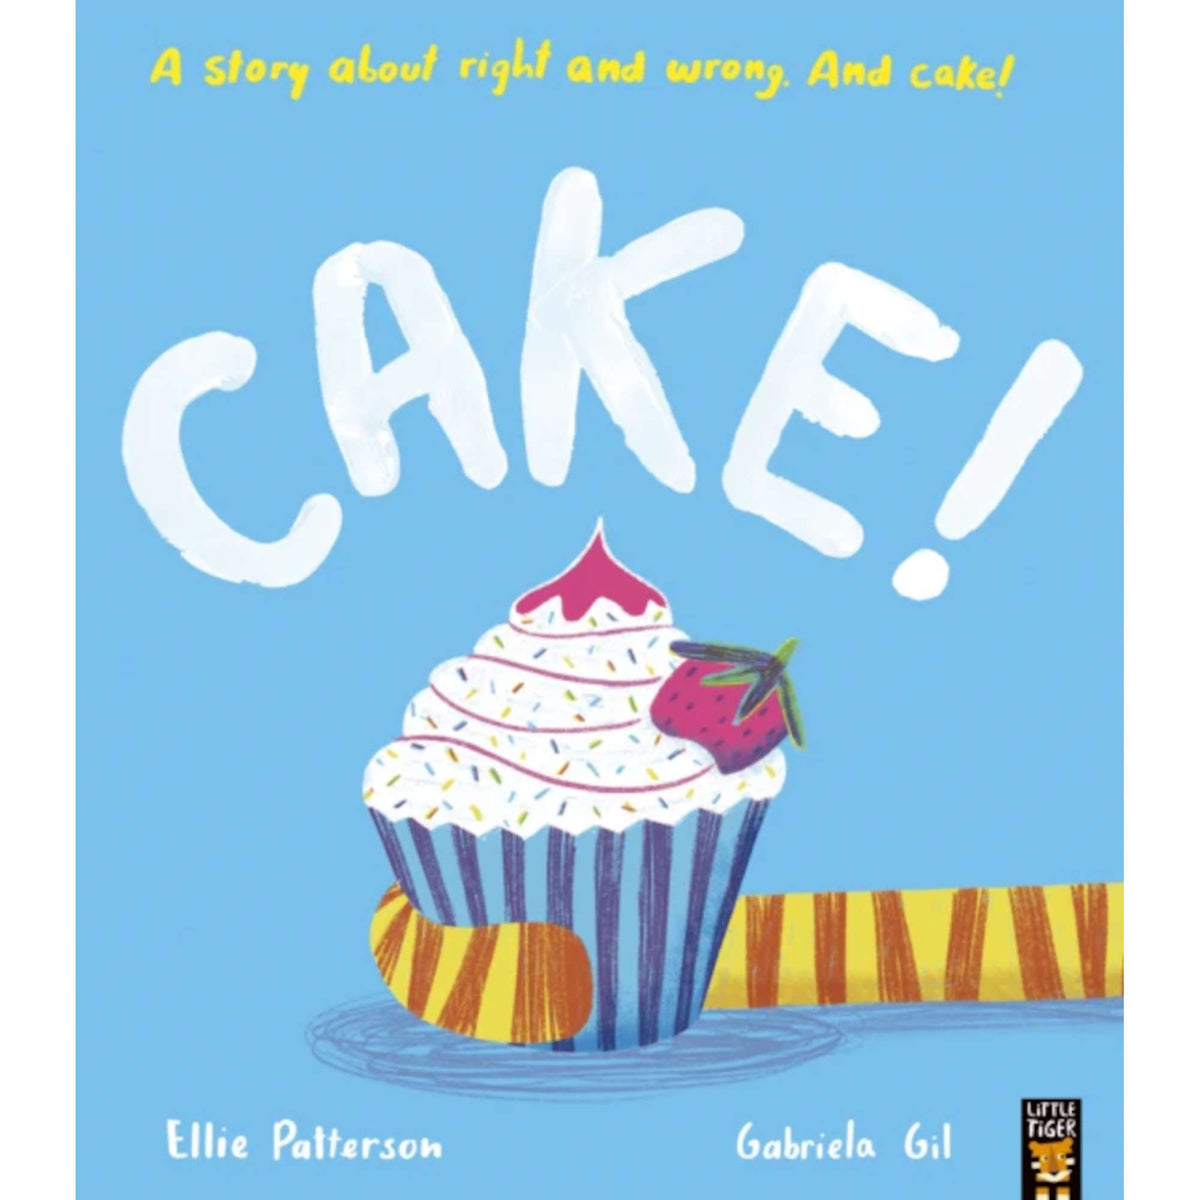 Cake! : A story about right and wrong. And cake!